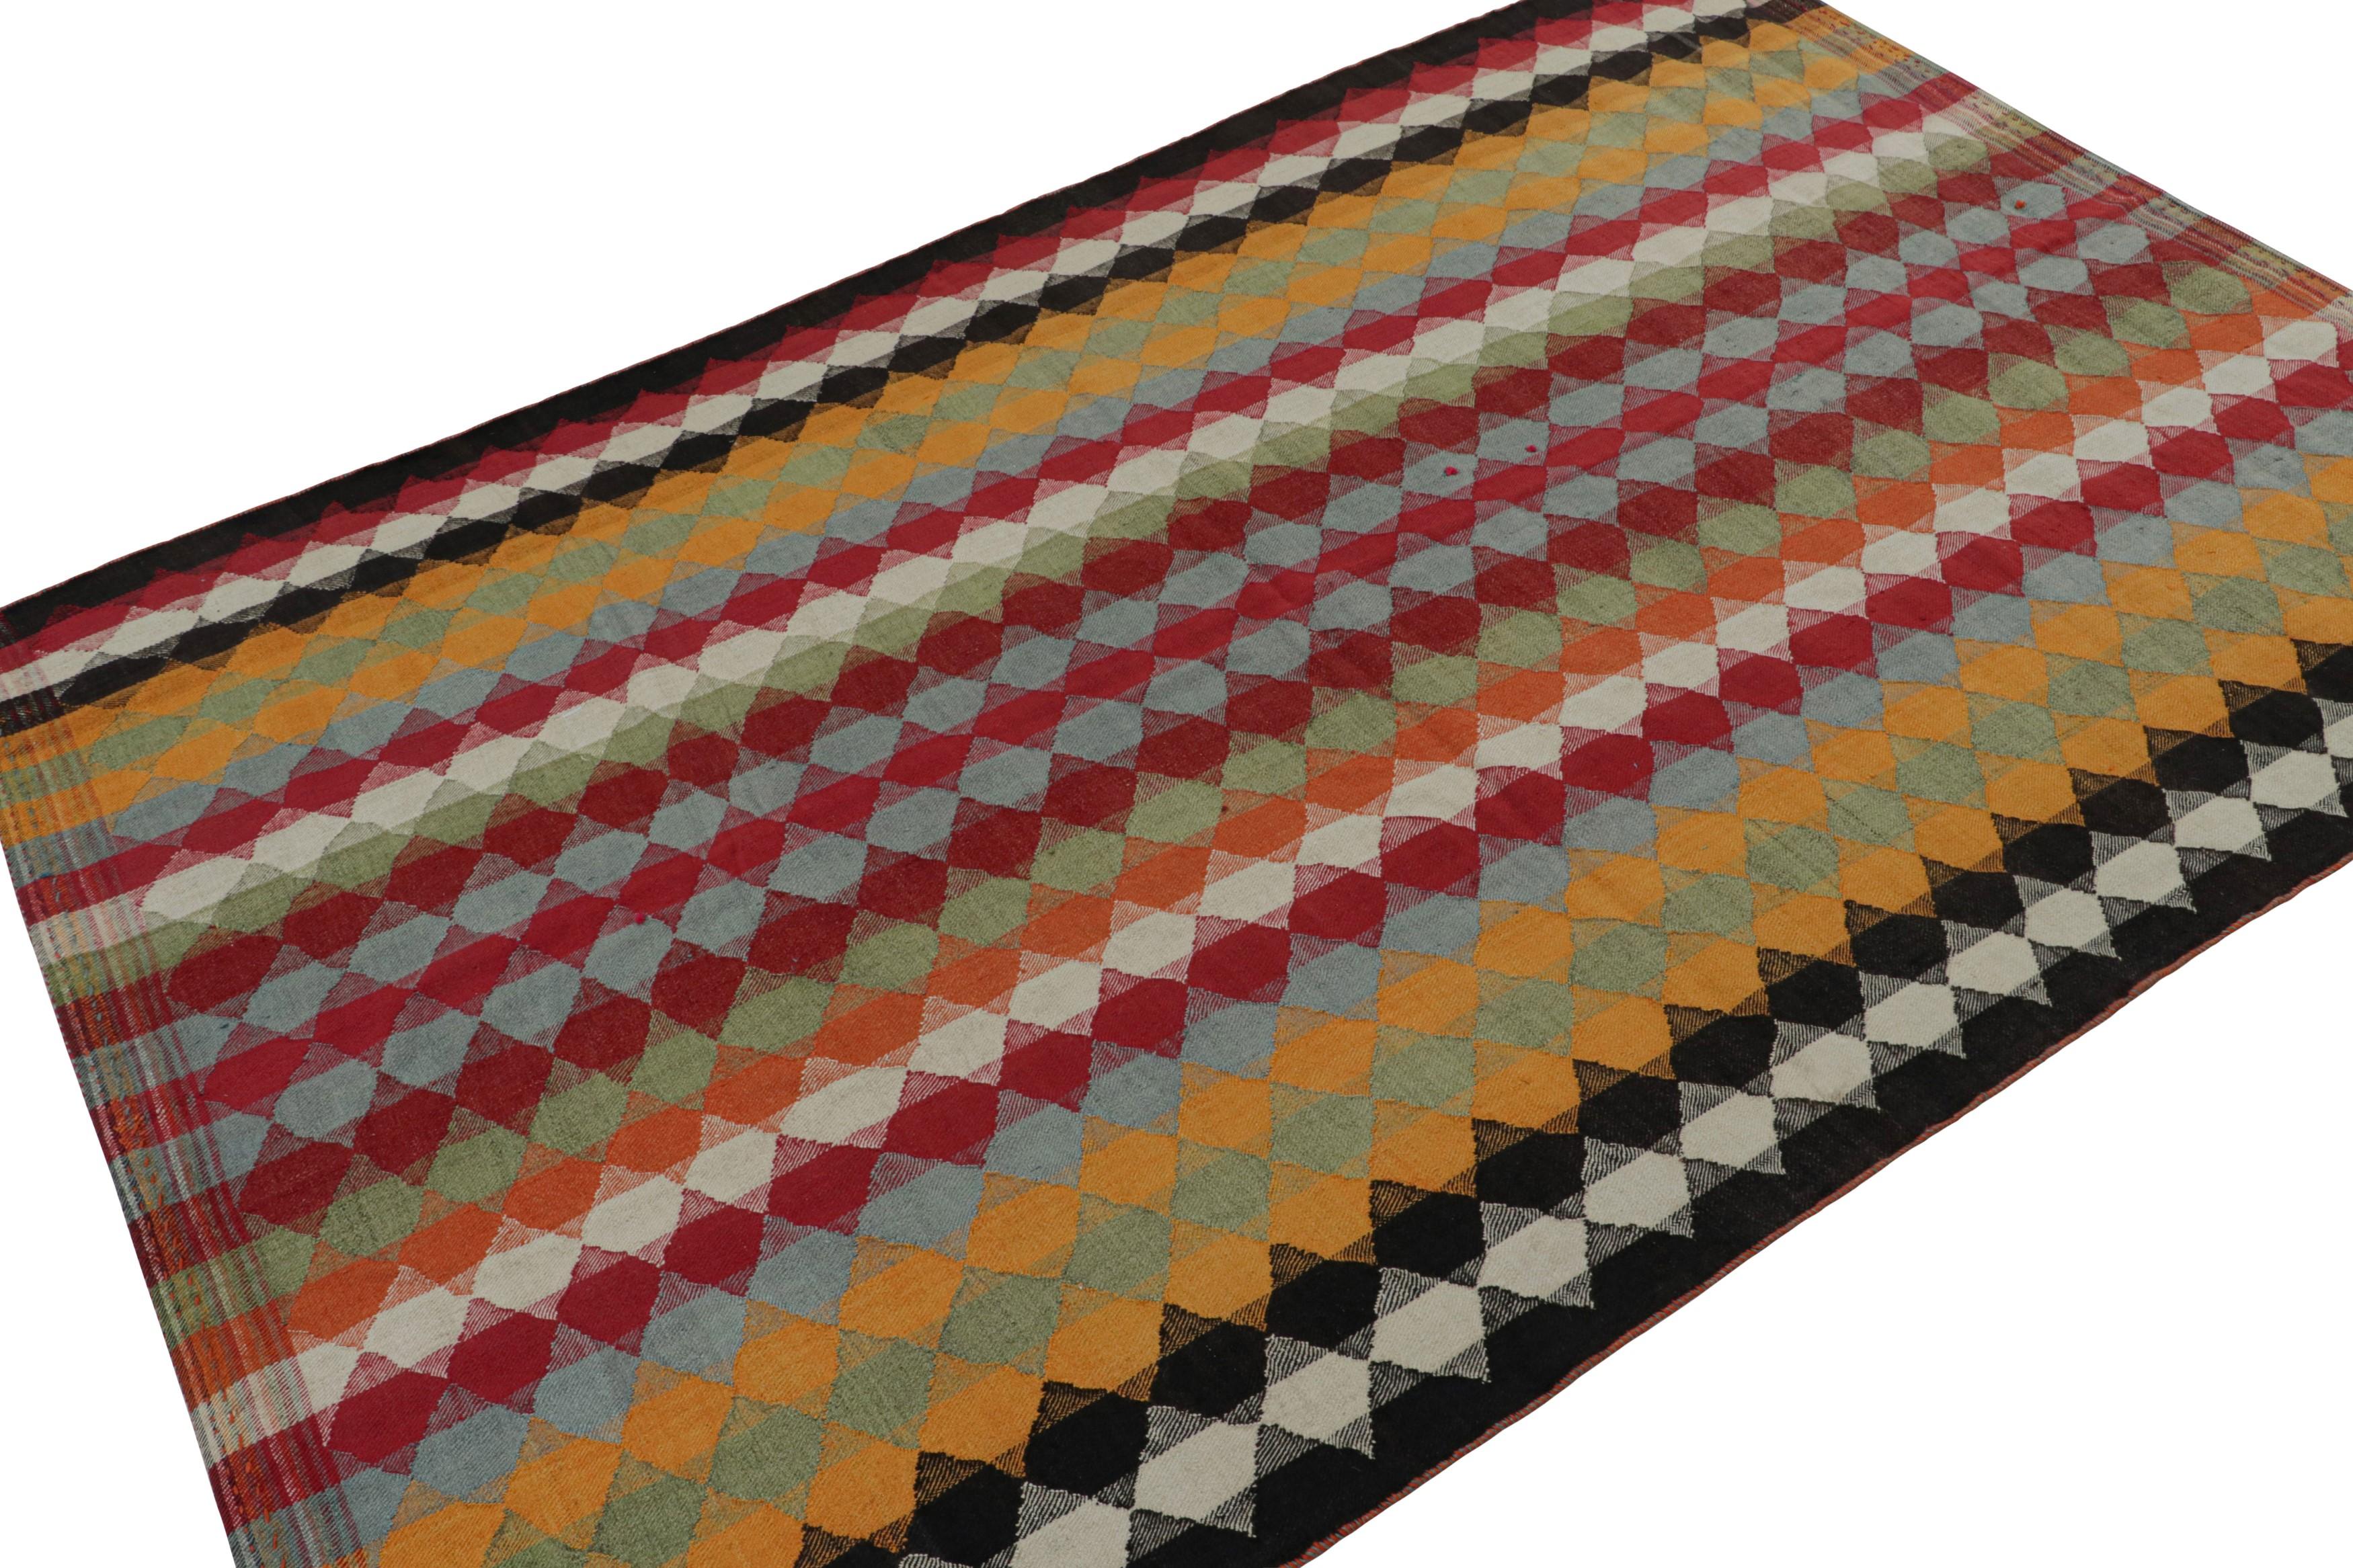 Handmade in wool, circa 1950-1960, this 5x7 vintage tribal Afghan Kilim rug in red, features a play of stripes and diamonds in its particular geometric pattern in hues of red, blue, silver/gray, and yellow. 

On the Design: 

Connoisseurs will